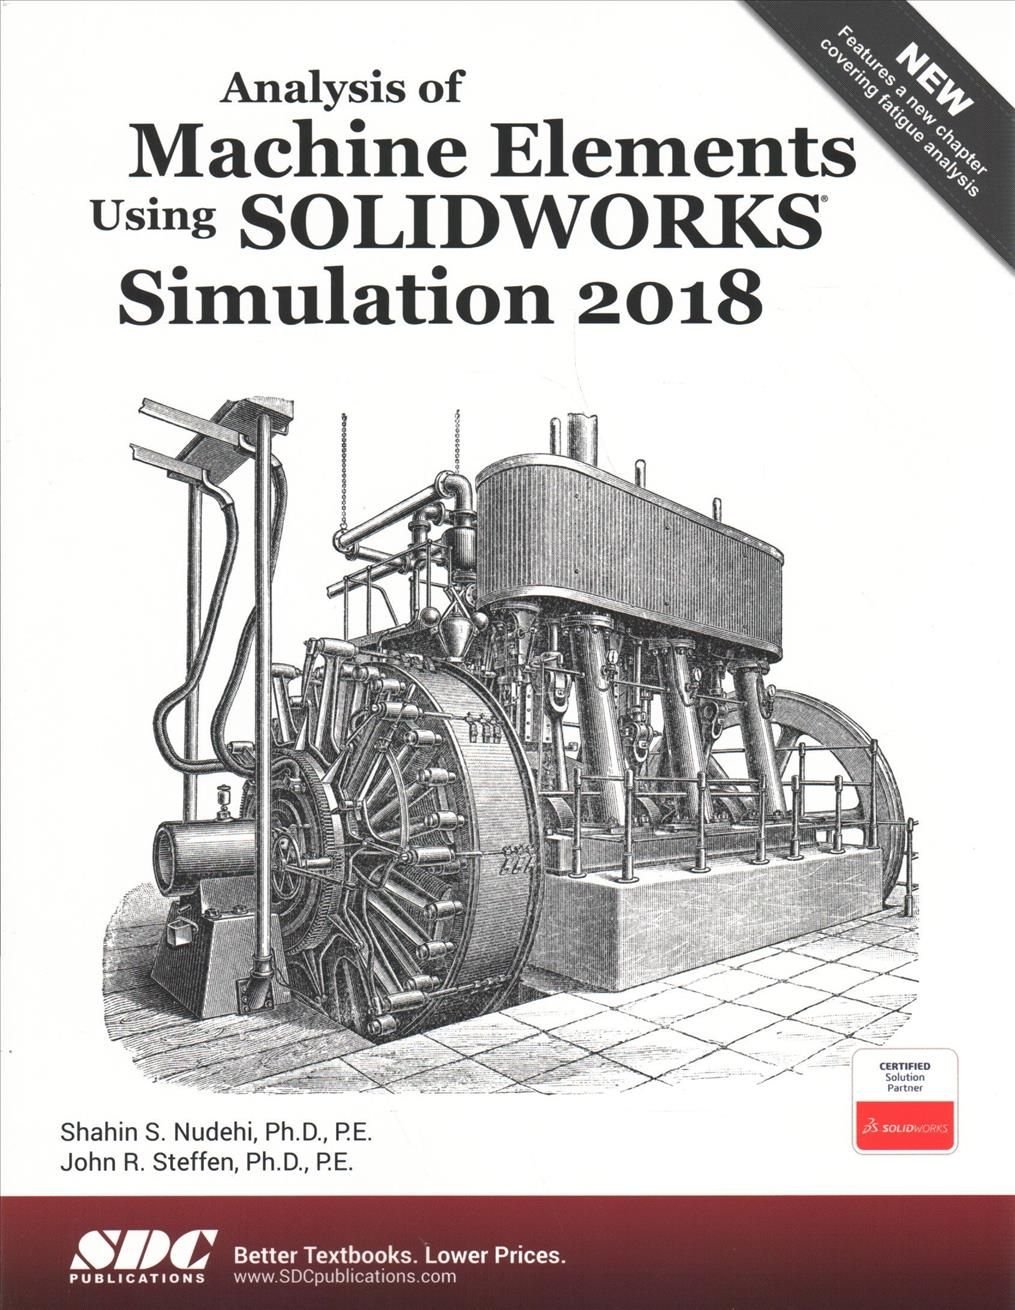 Analysis of Machine Elements Using SOLIDWORKS Simulation 2018